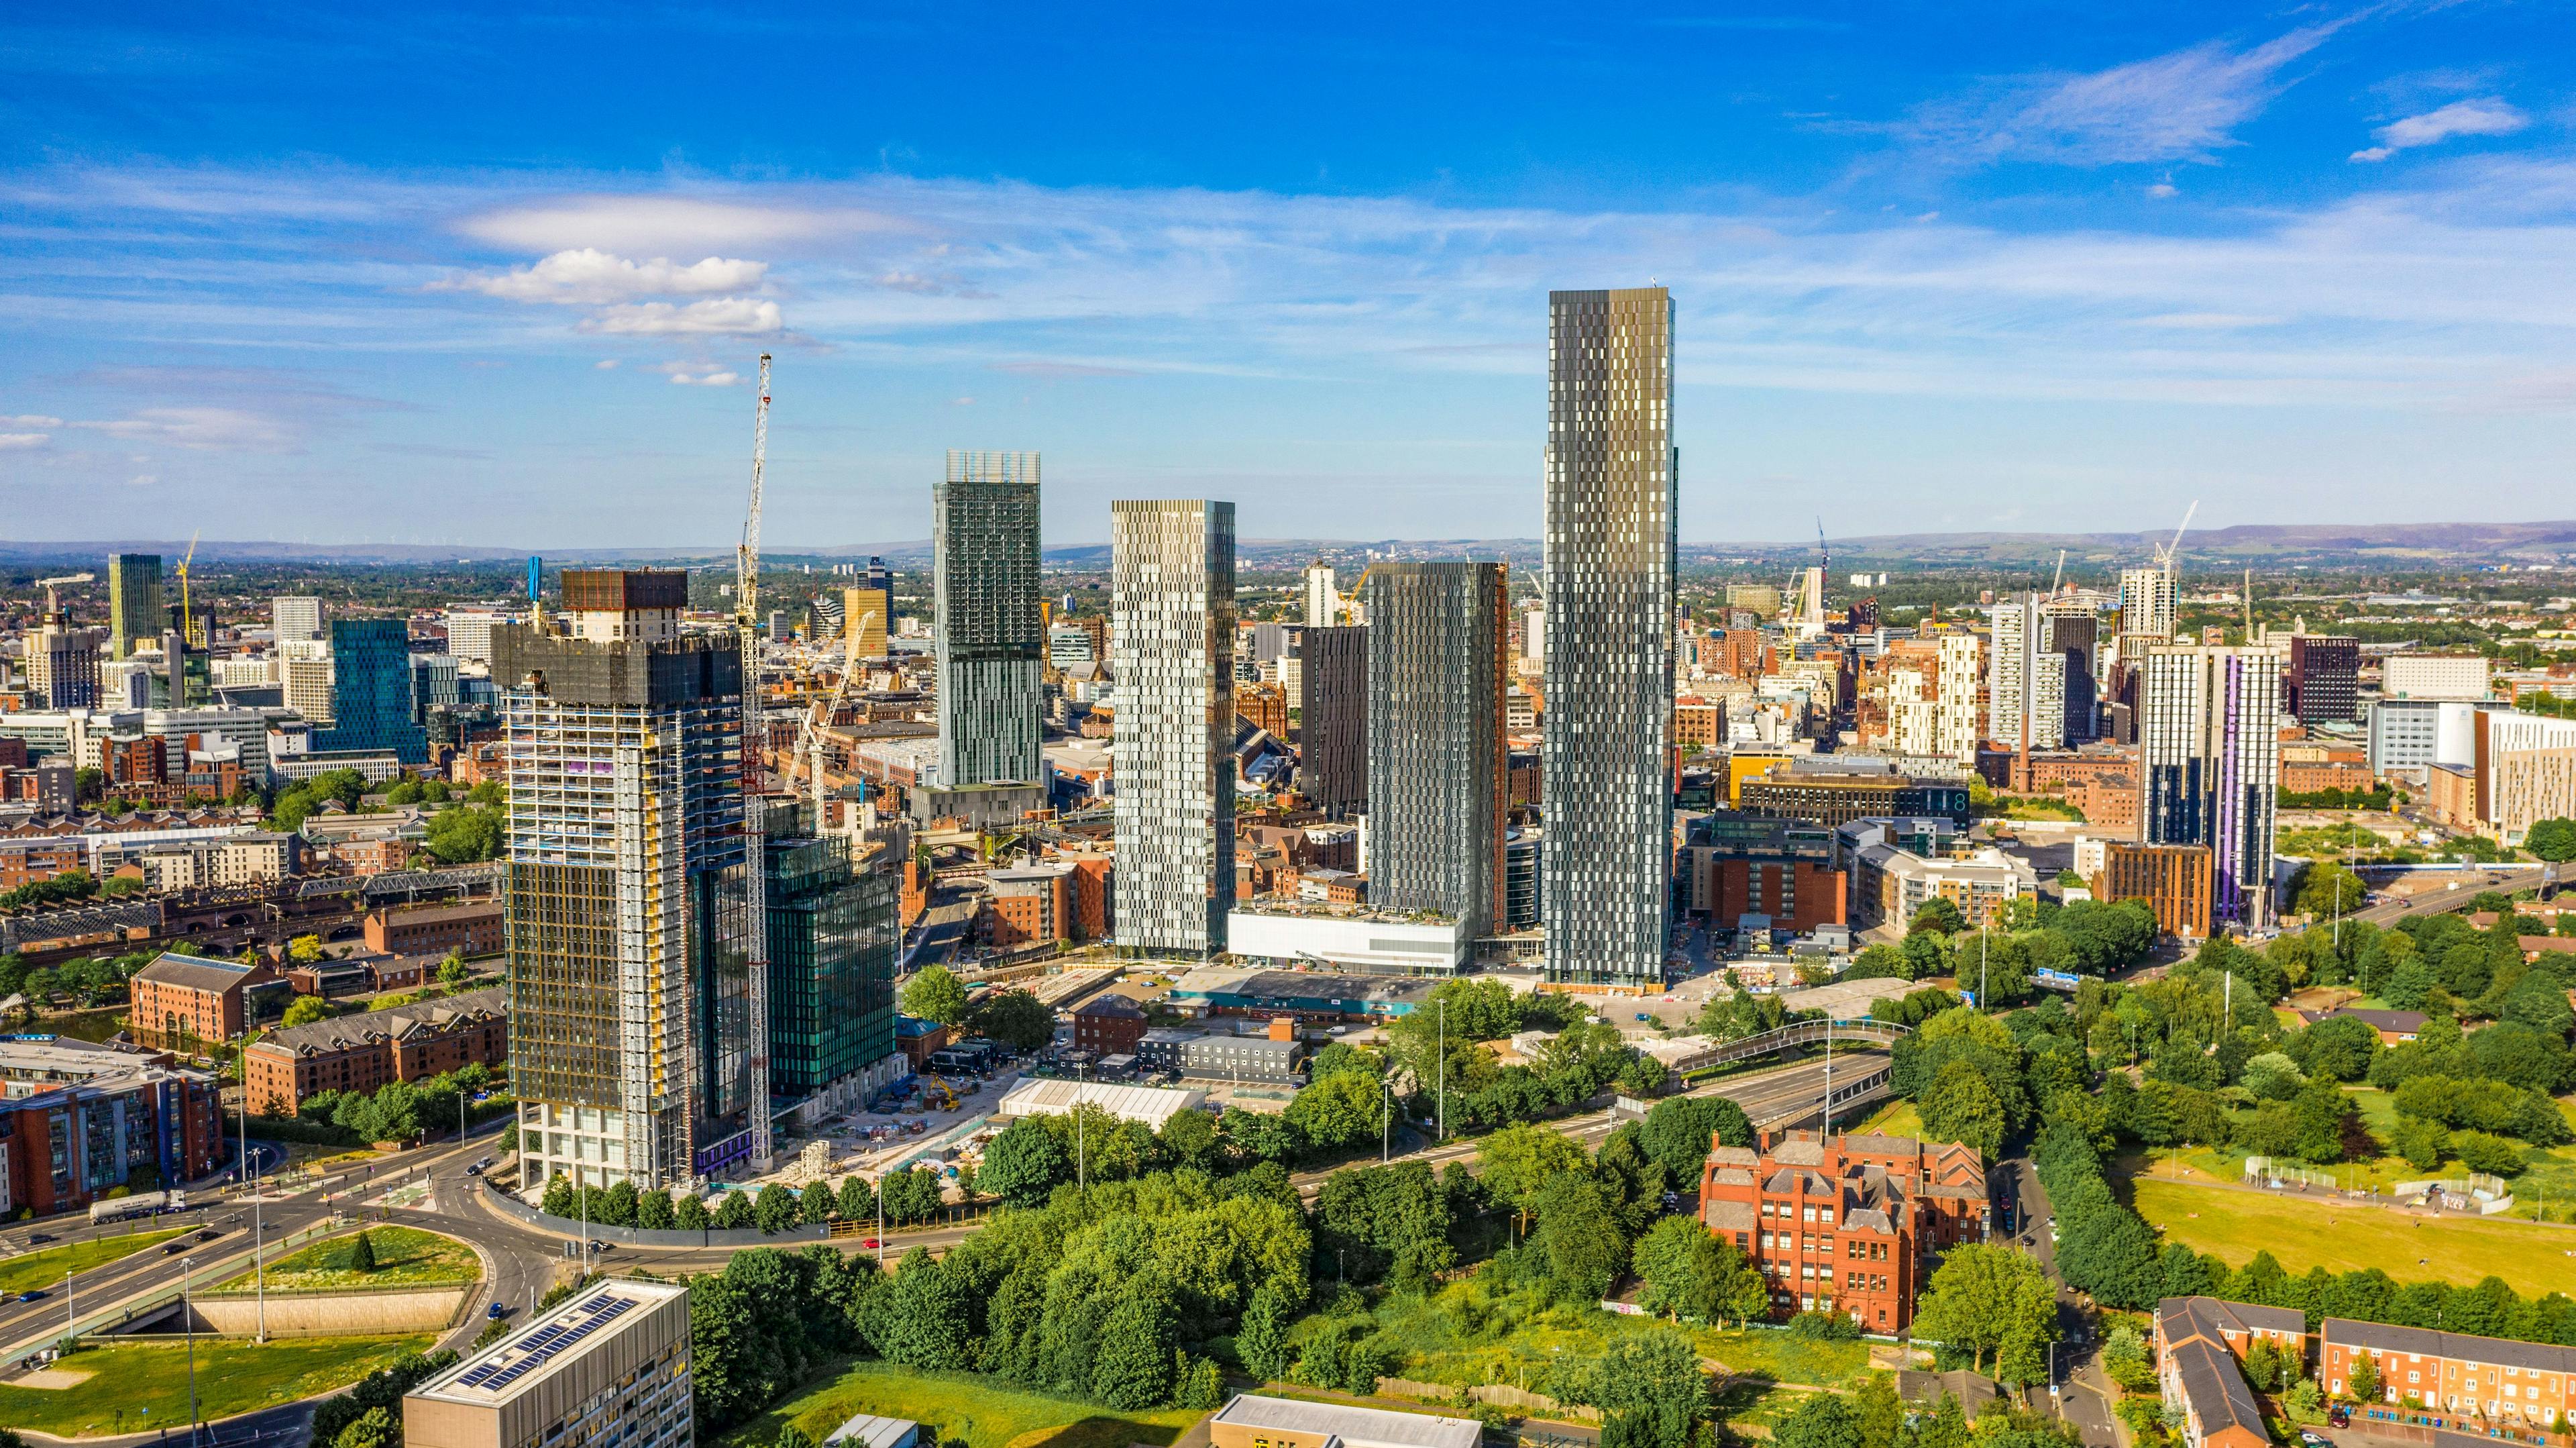 Aerial shot of Manchester UK on a beautiful summer day during pandemic lock-down | Image Credit: © zaeball - stock.adobe.com